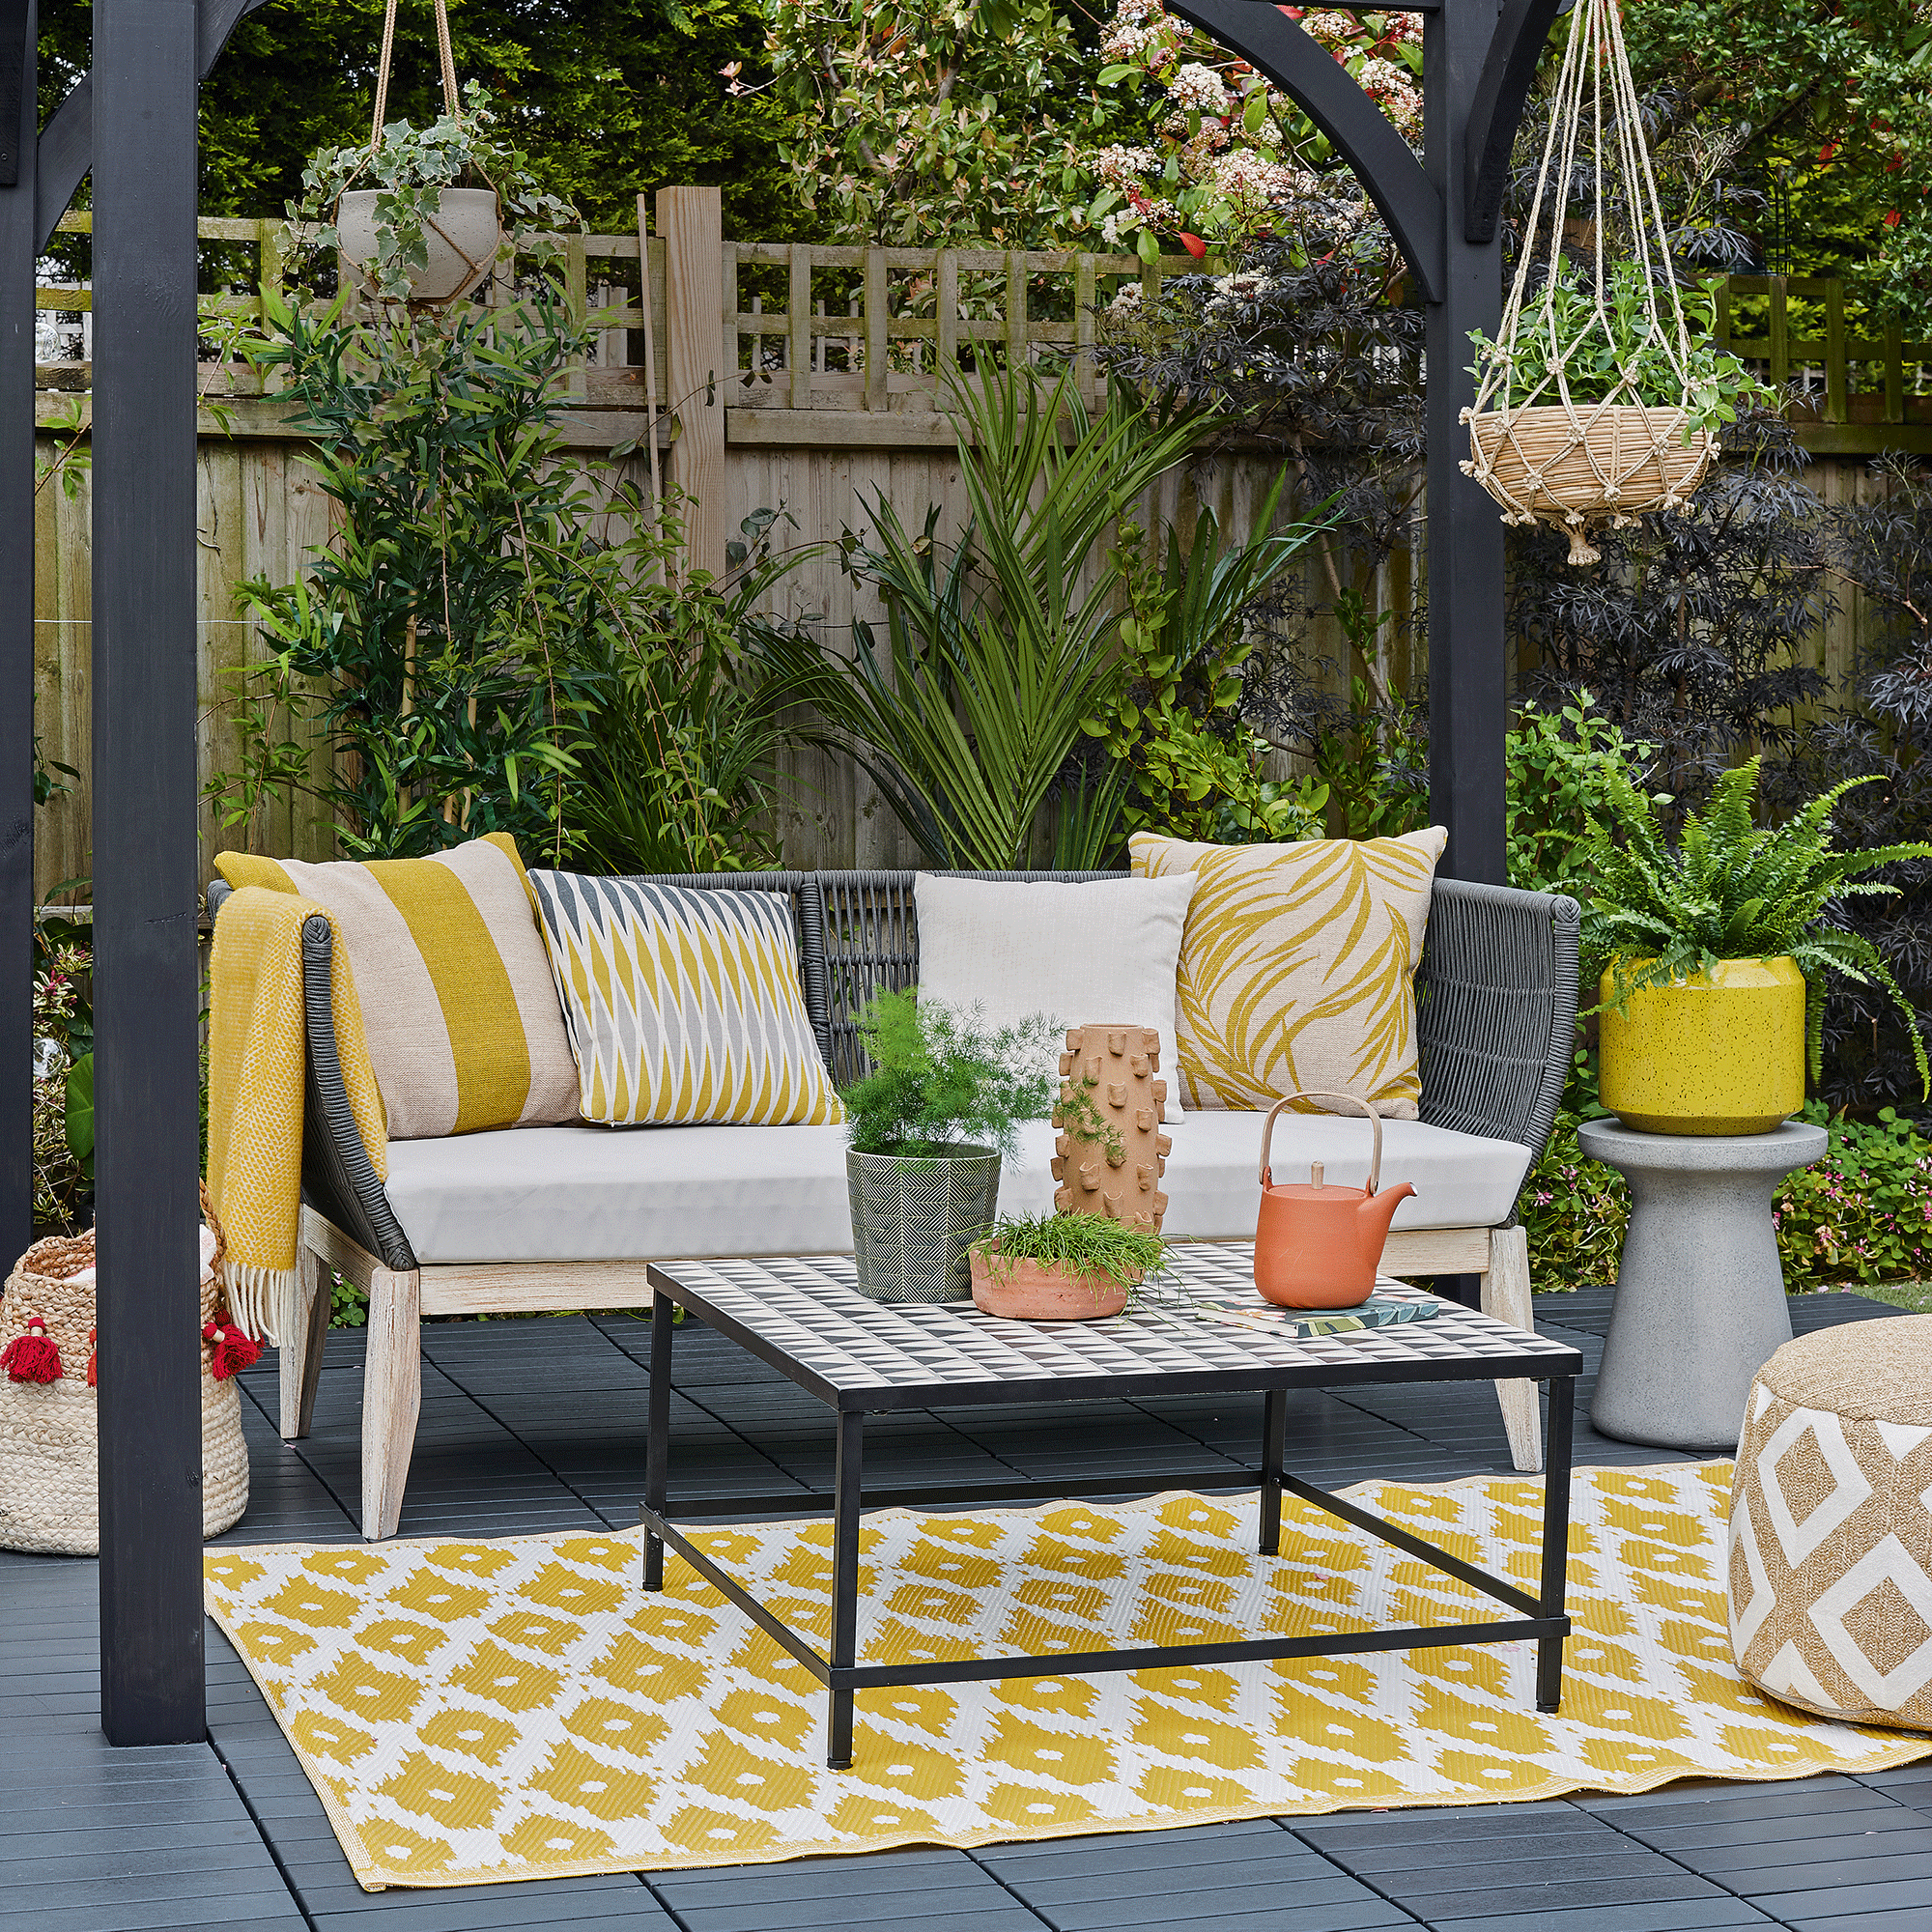 Blue pergola with bench and yellow rug